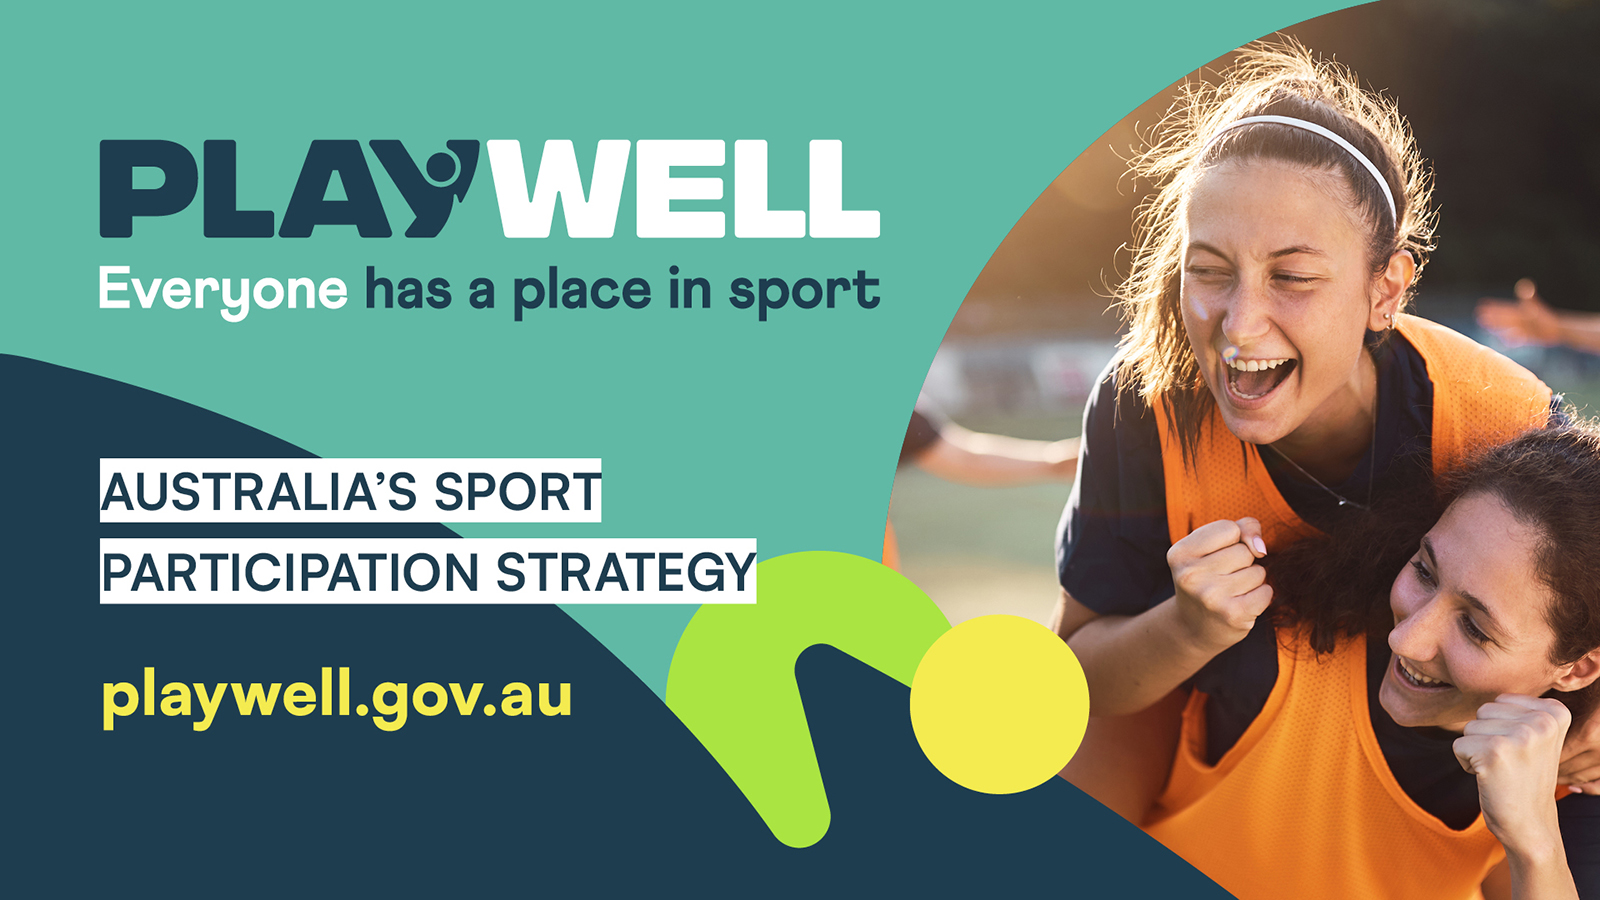 Two young people in sports clothes with text: Play well. Everyone has a place in sport. Playwell.gov.au